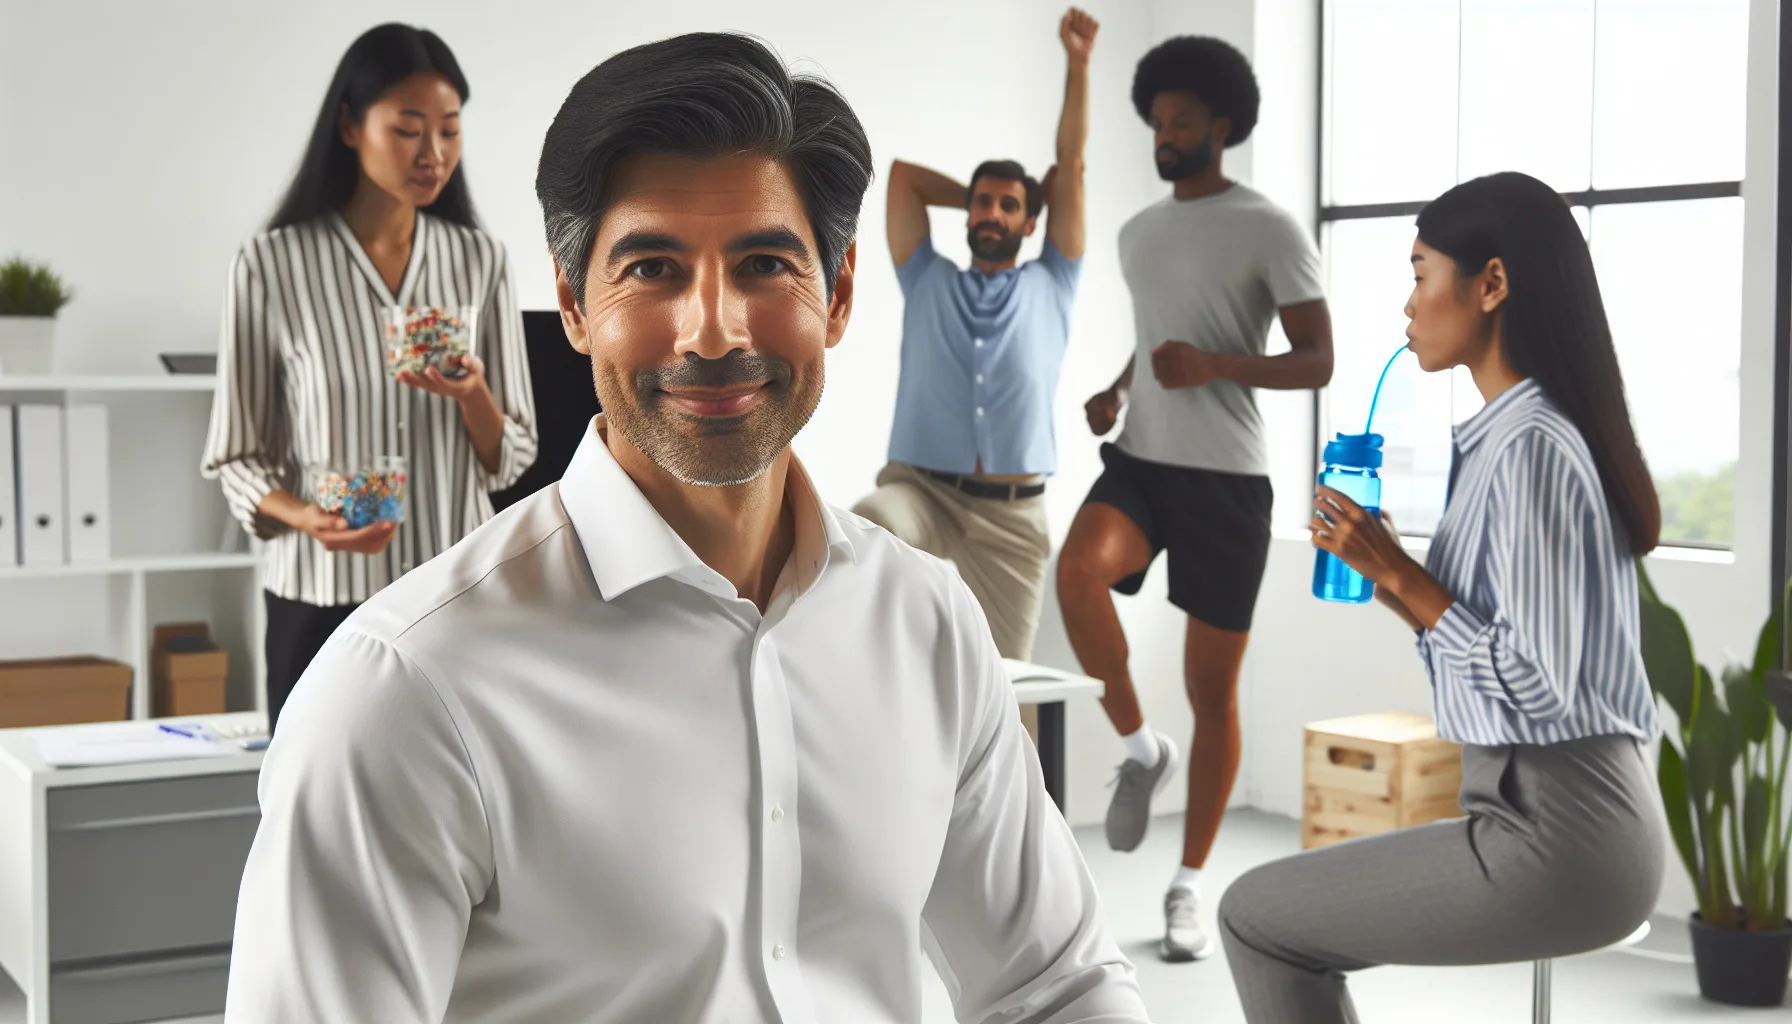 Implement workplace wellness initiatives that promote physical health and improve overall employee productivity.